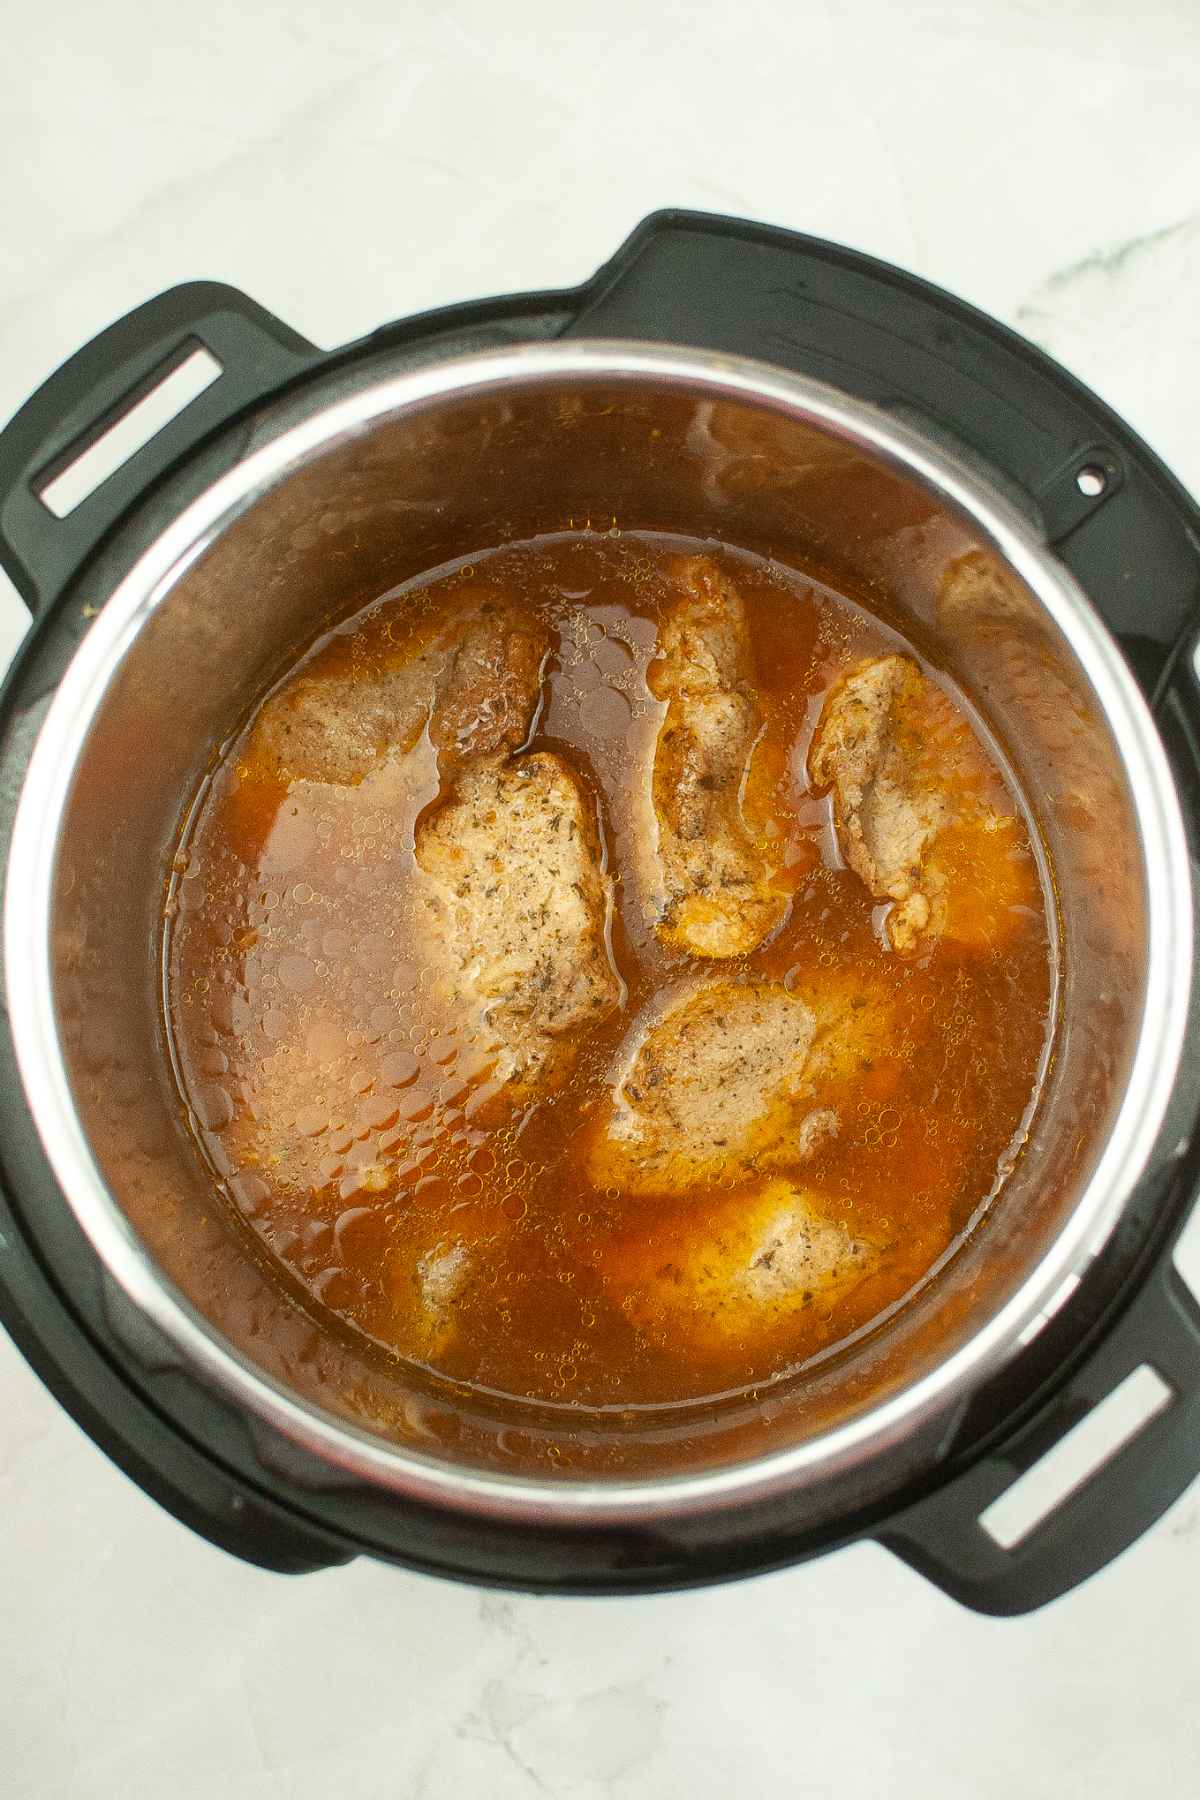 Cooked ribs in the cooking broth in an instant pot.